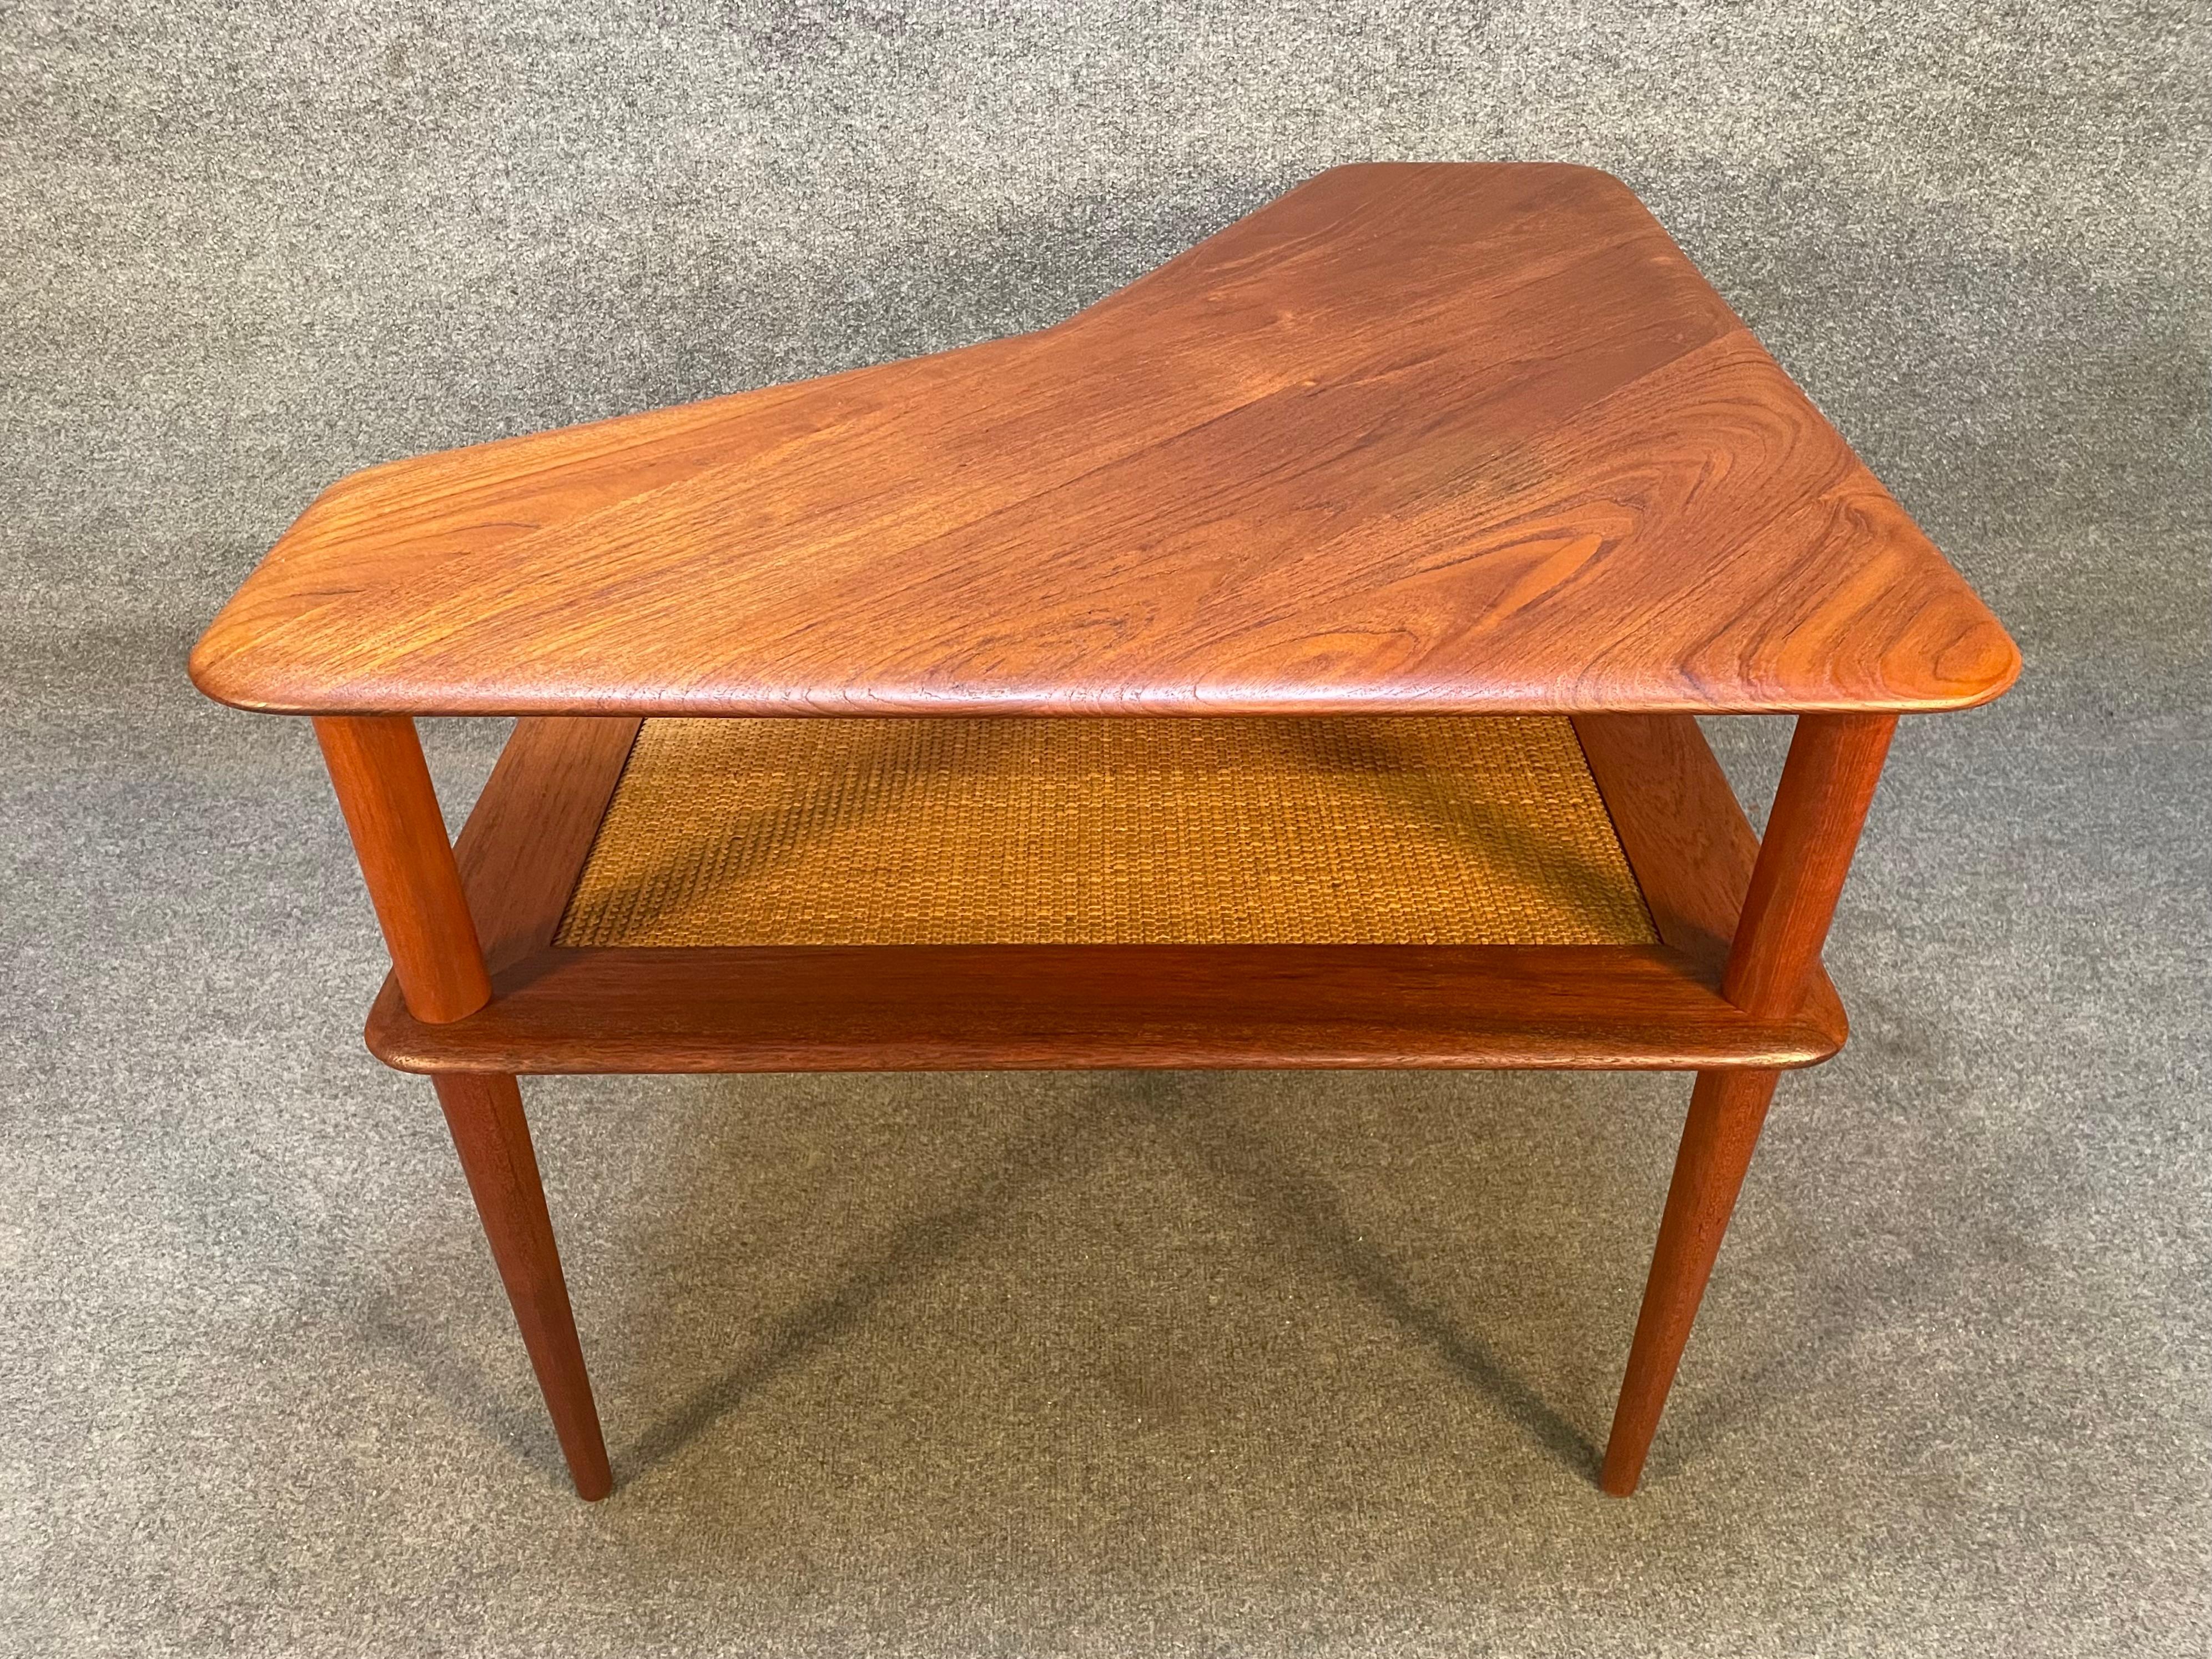 Here is a beautiful Scandinavian modern end table in teak designed by Peter Hvidt & Orlaa Molgaard and manufactured by France and Son in Denmark in the 1960's.
This exquisite corner table, recently imported from Europe to California become its